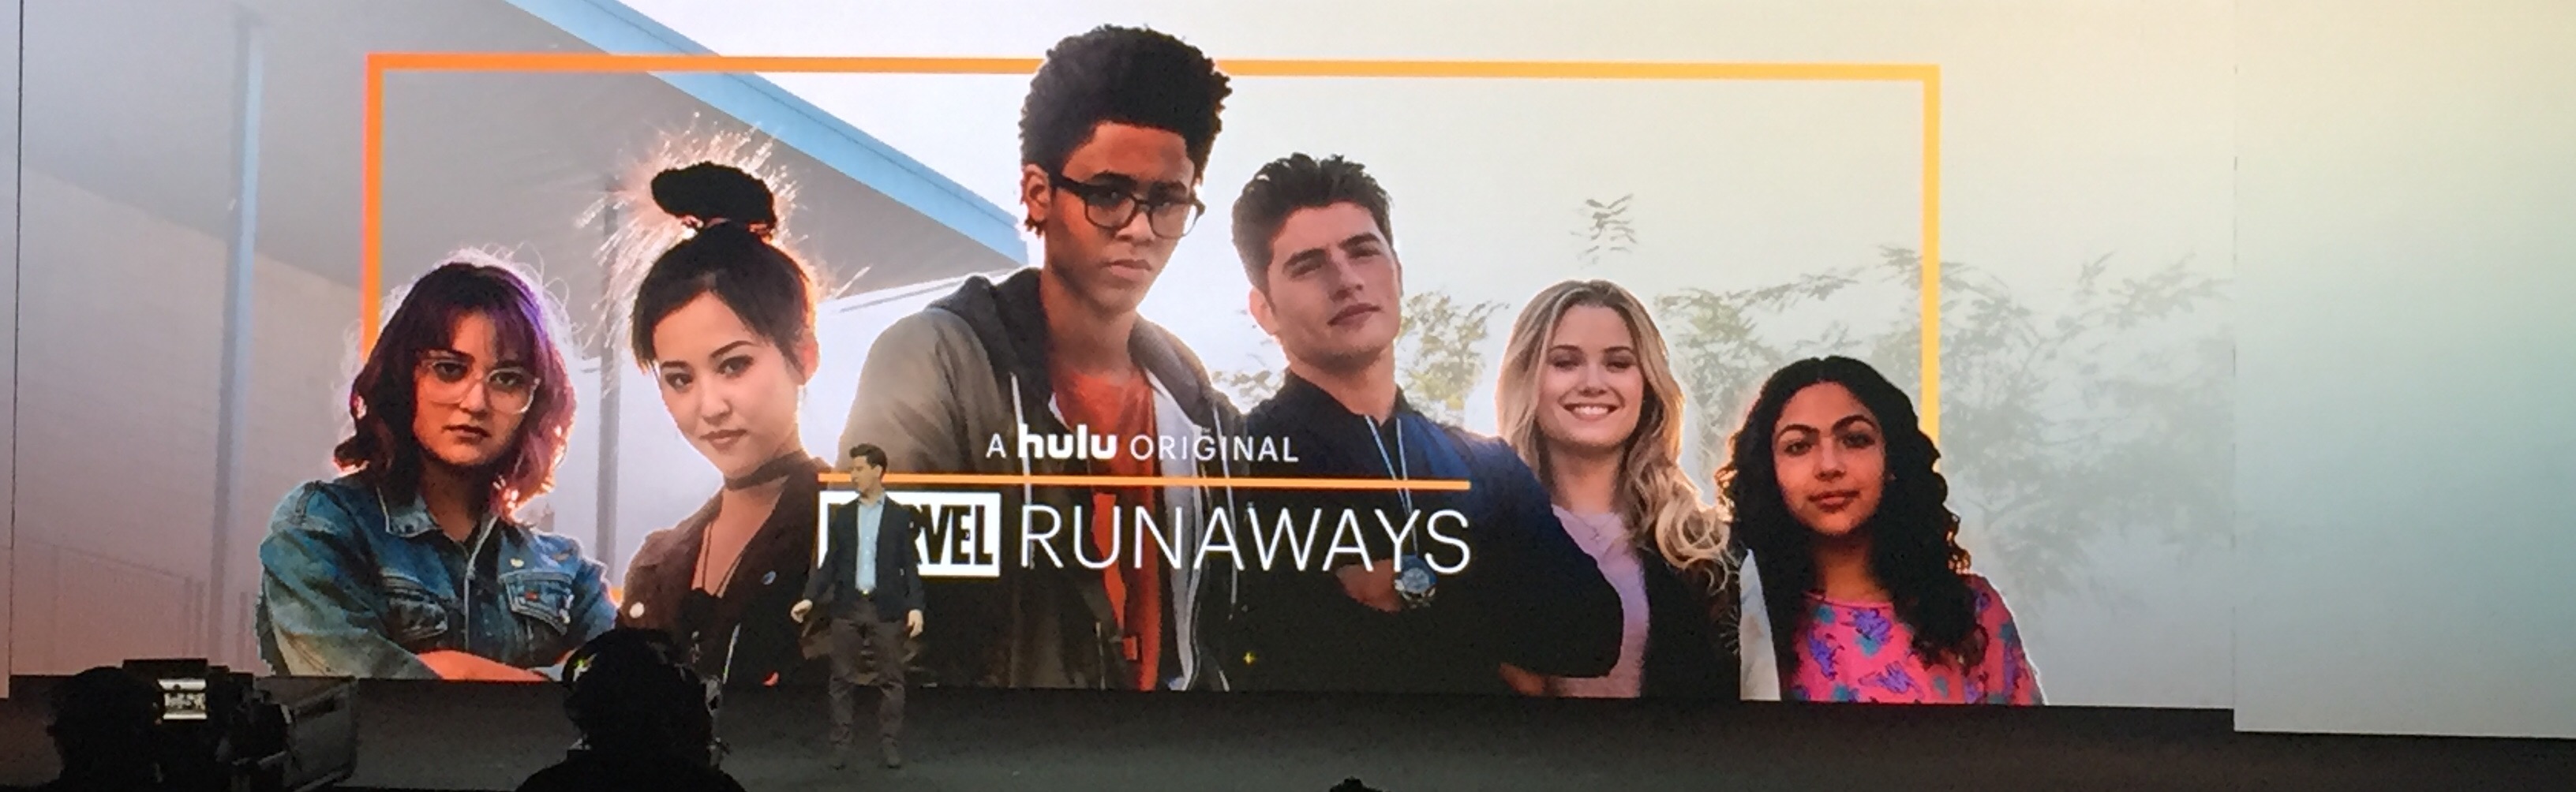 Exclusive: First Look Trailer at Marvel’s ‘Runaways’ on Hulu